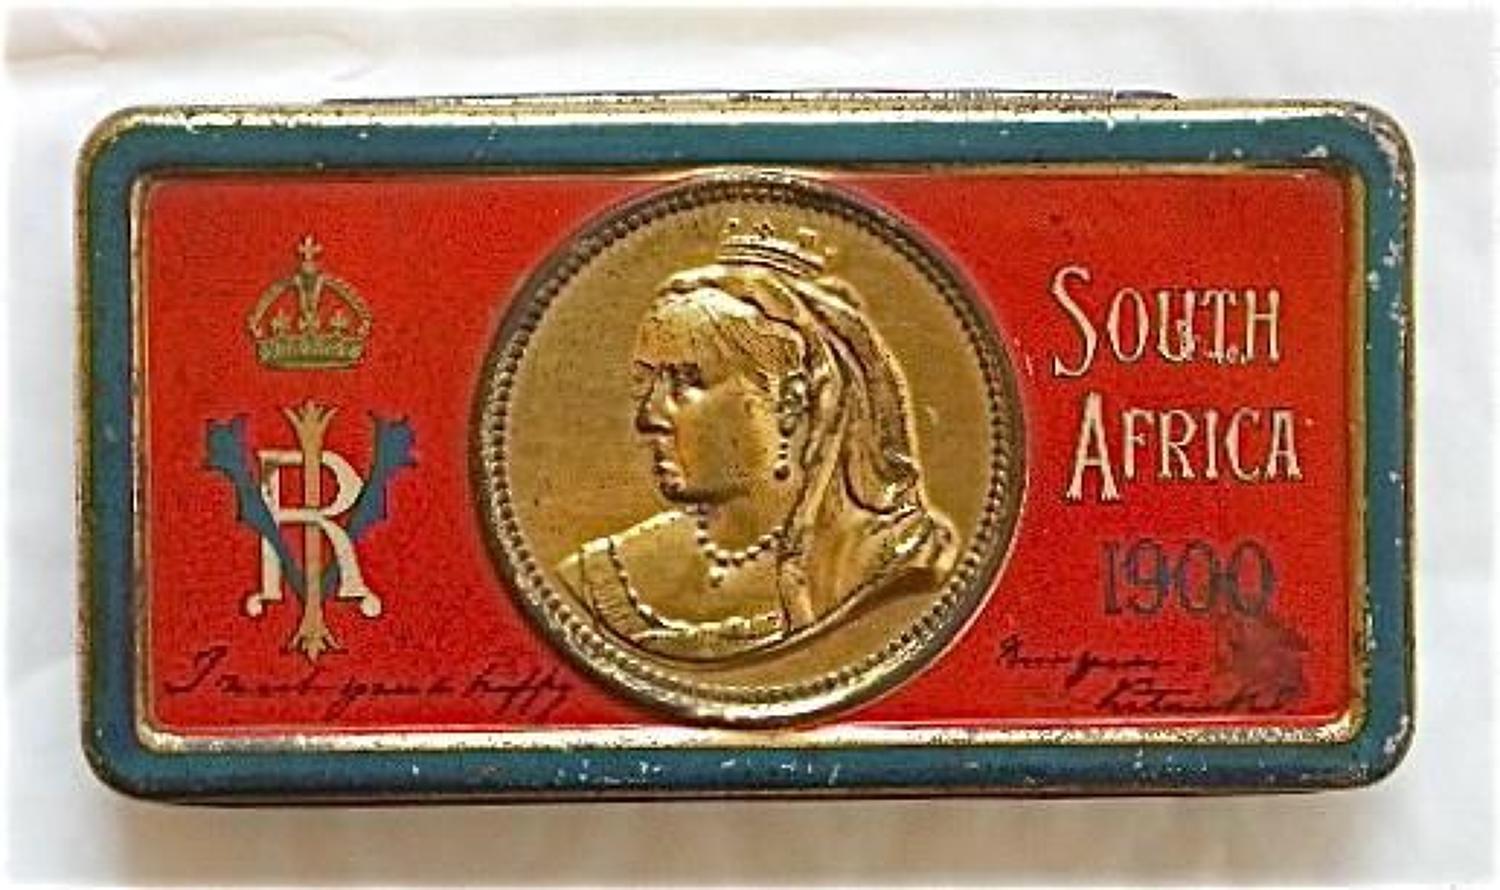 Boer War Christmas chocolate tin and contents by Cadburys